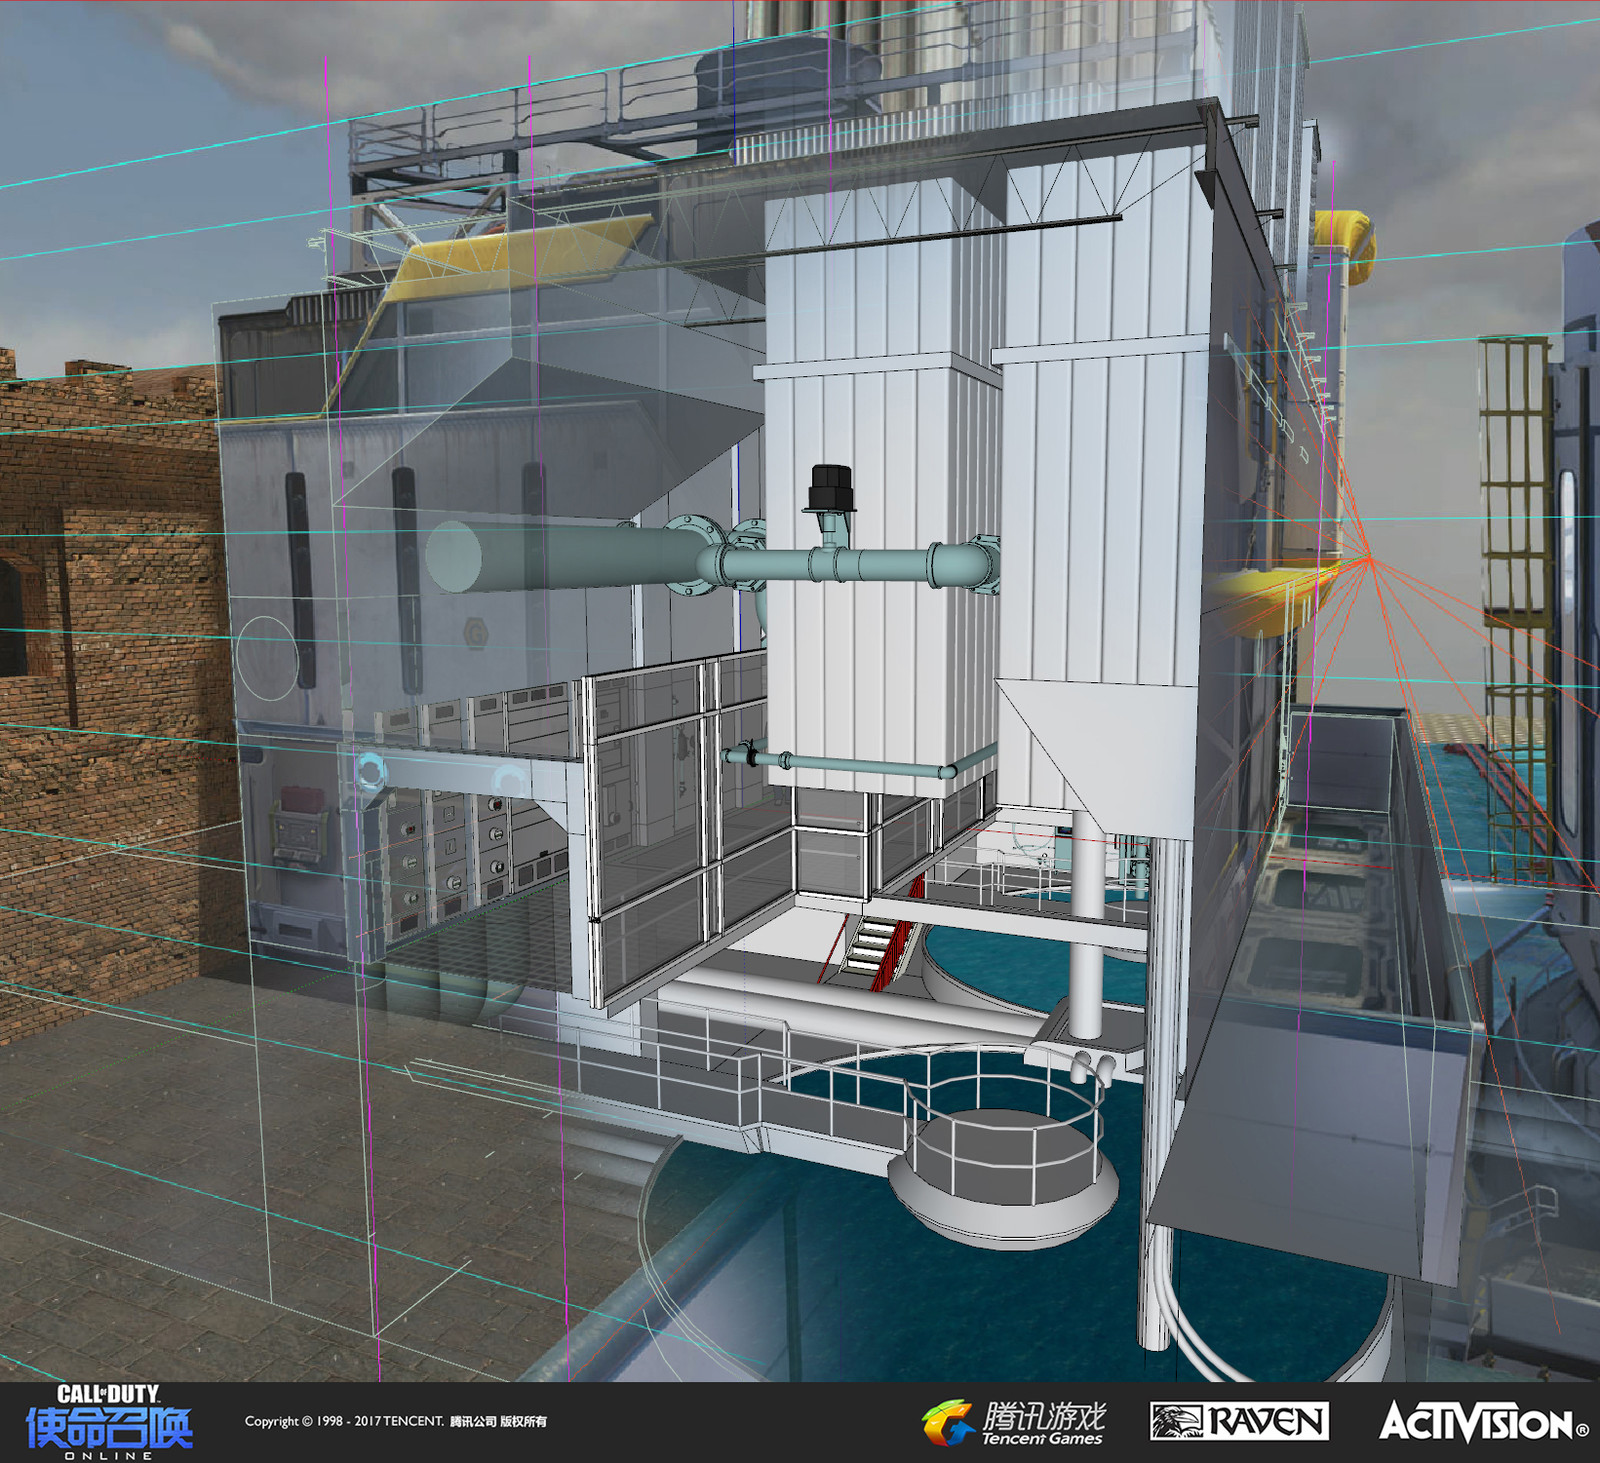 For the interior concept of the water filtration building, I used SketchUp to deal with tight and narrow interior space. 